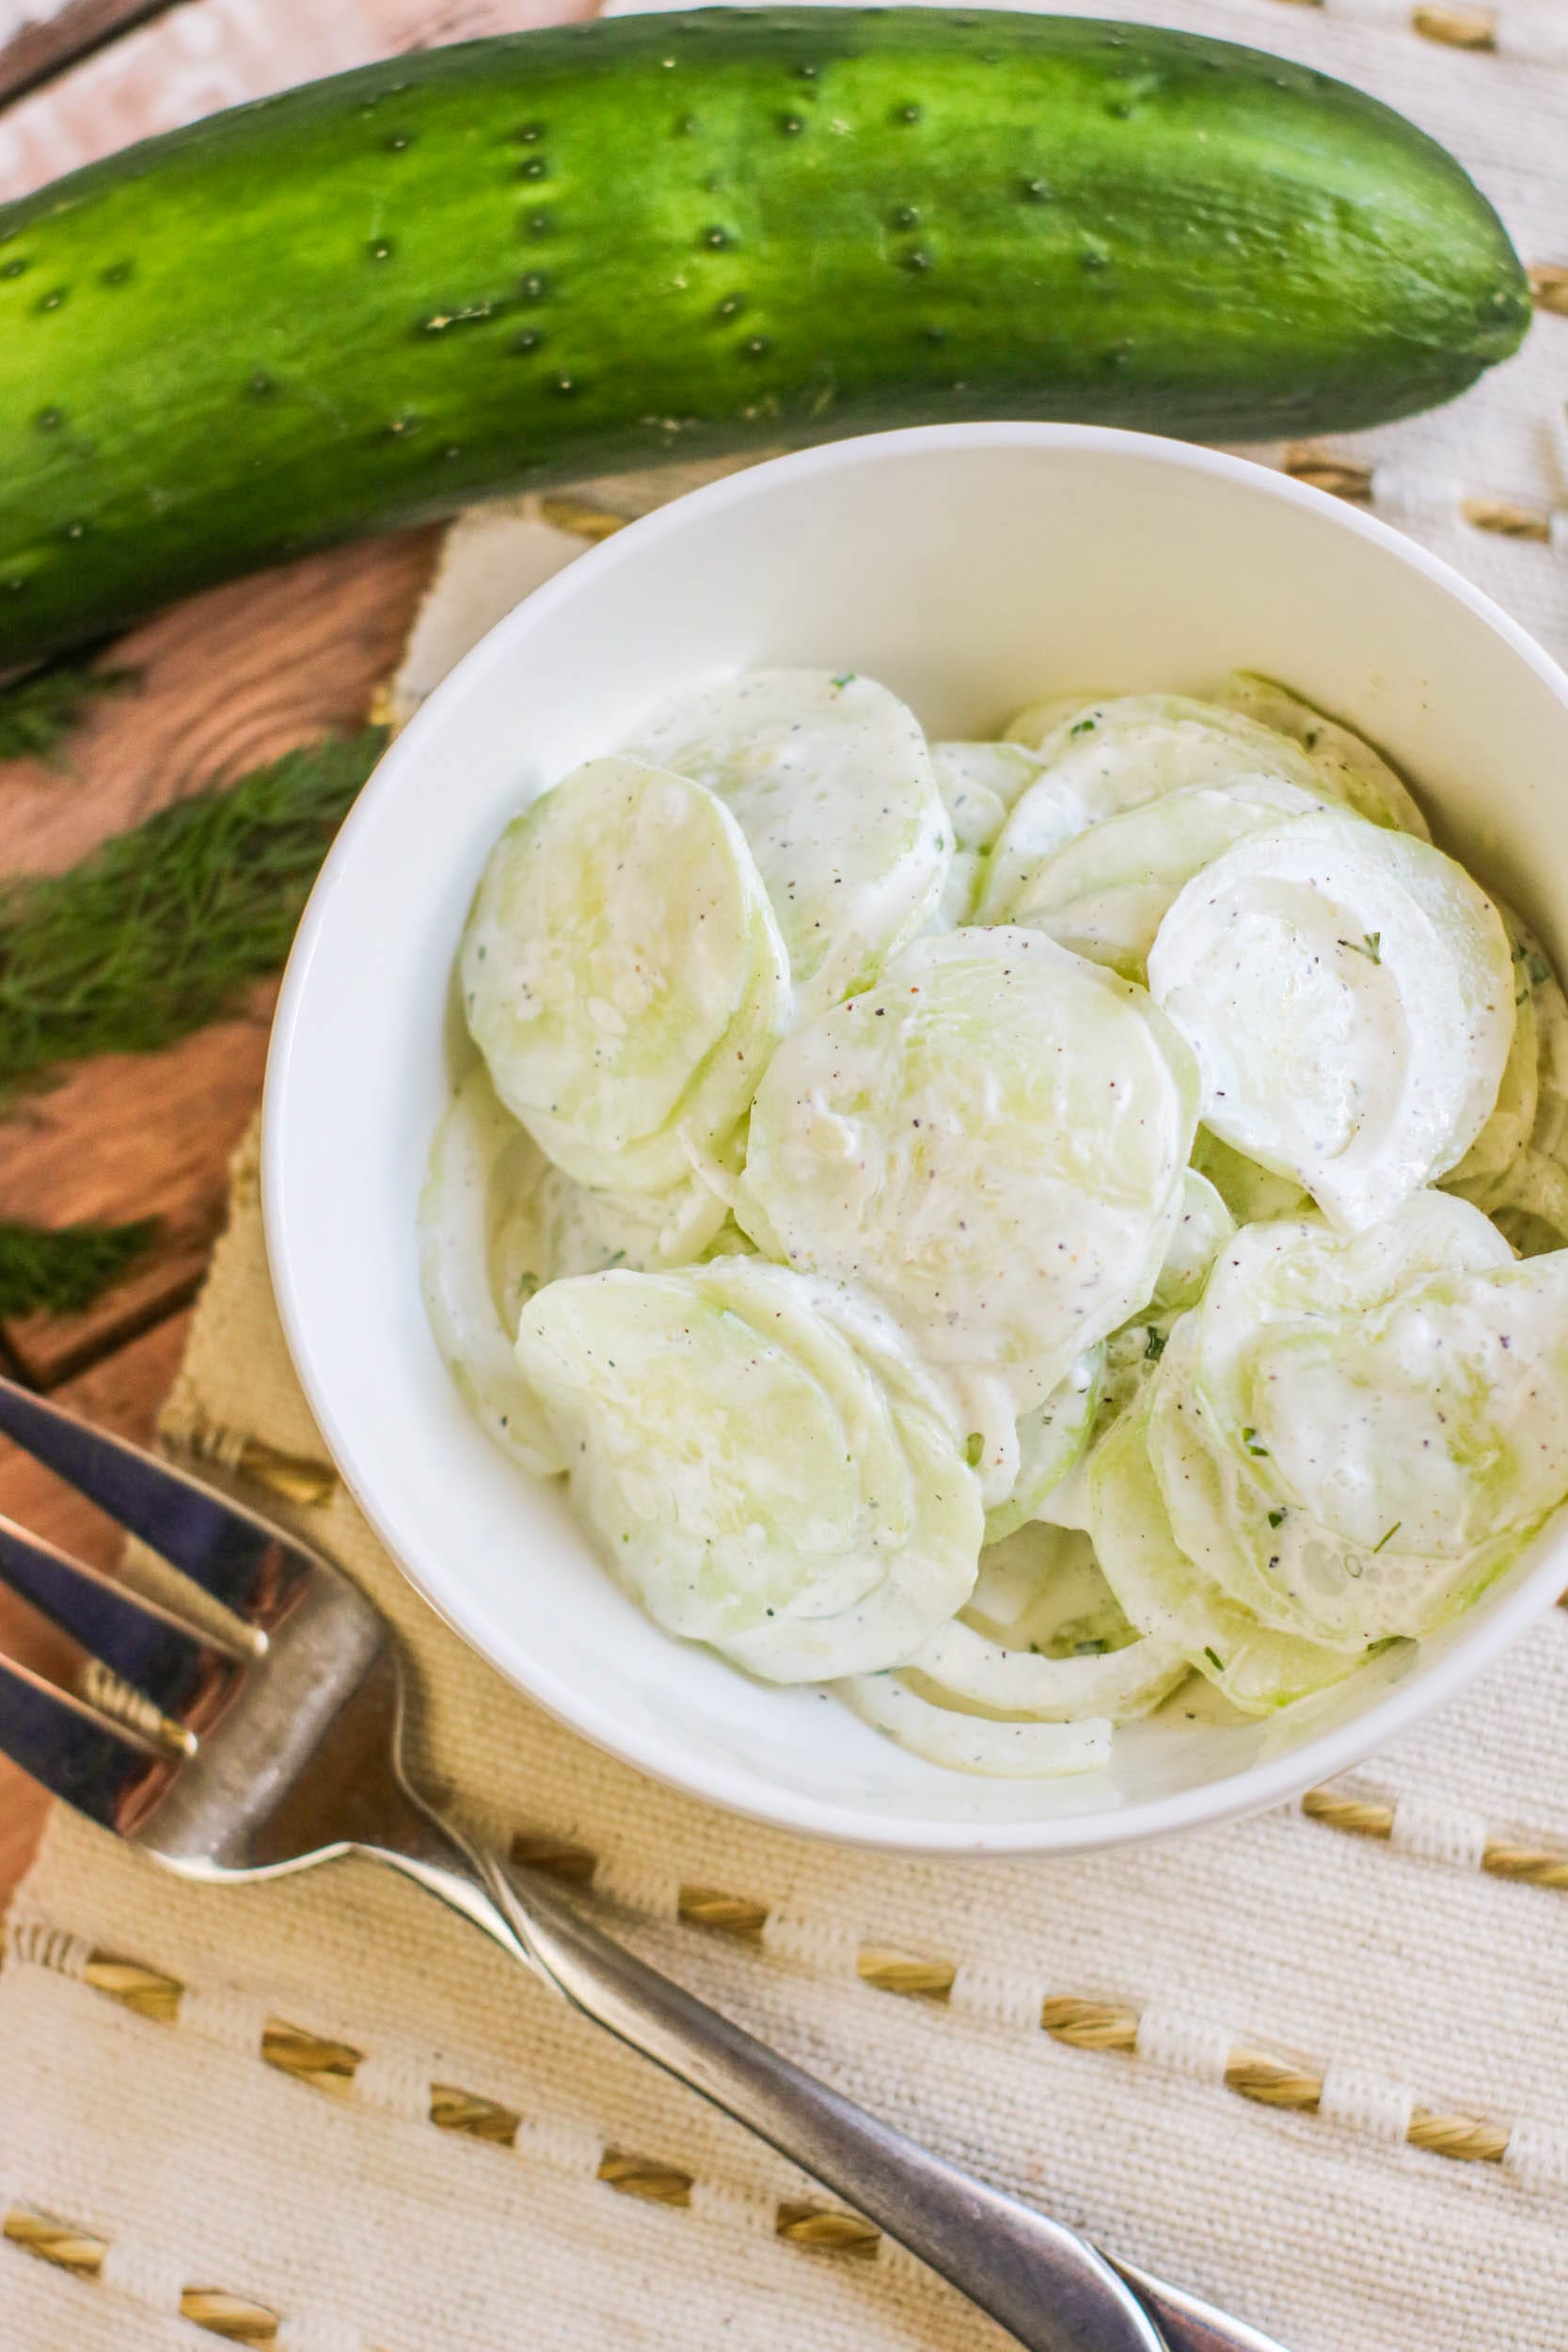 If you want the most amazing simple summer salad, you have to try this Amish Cucumber Salad recipe. It is incredibly easy and the taste is out of this world. Make this summer side dish for your next cookout, picnic or pot lucks. It doesn't get much better than this easy BBQ side dish!